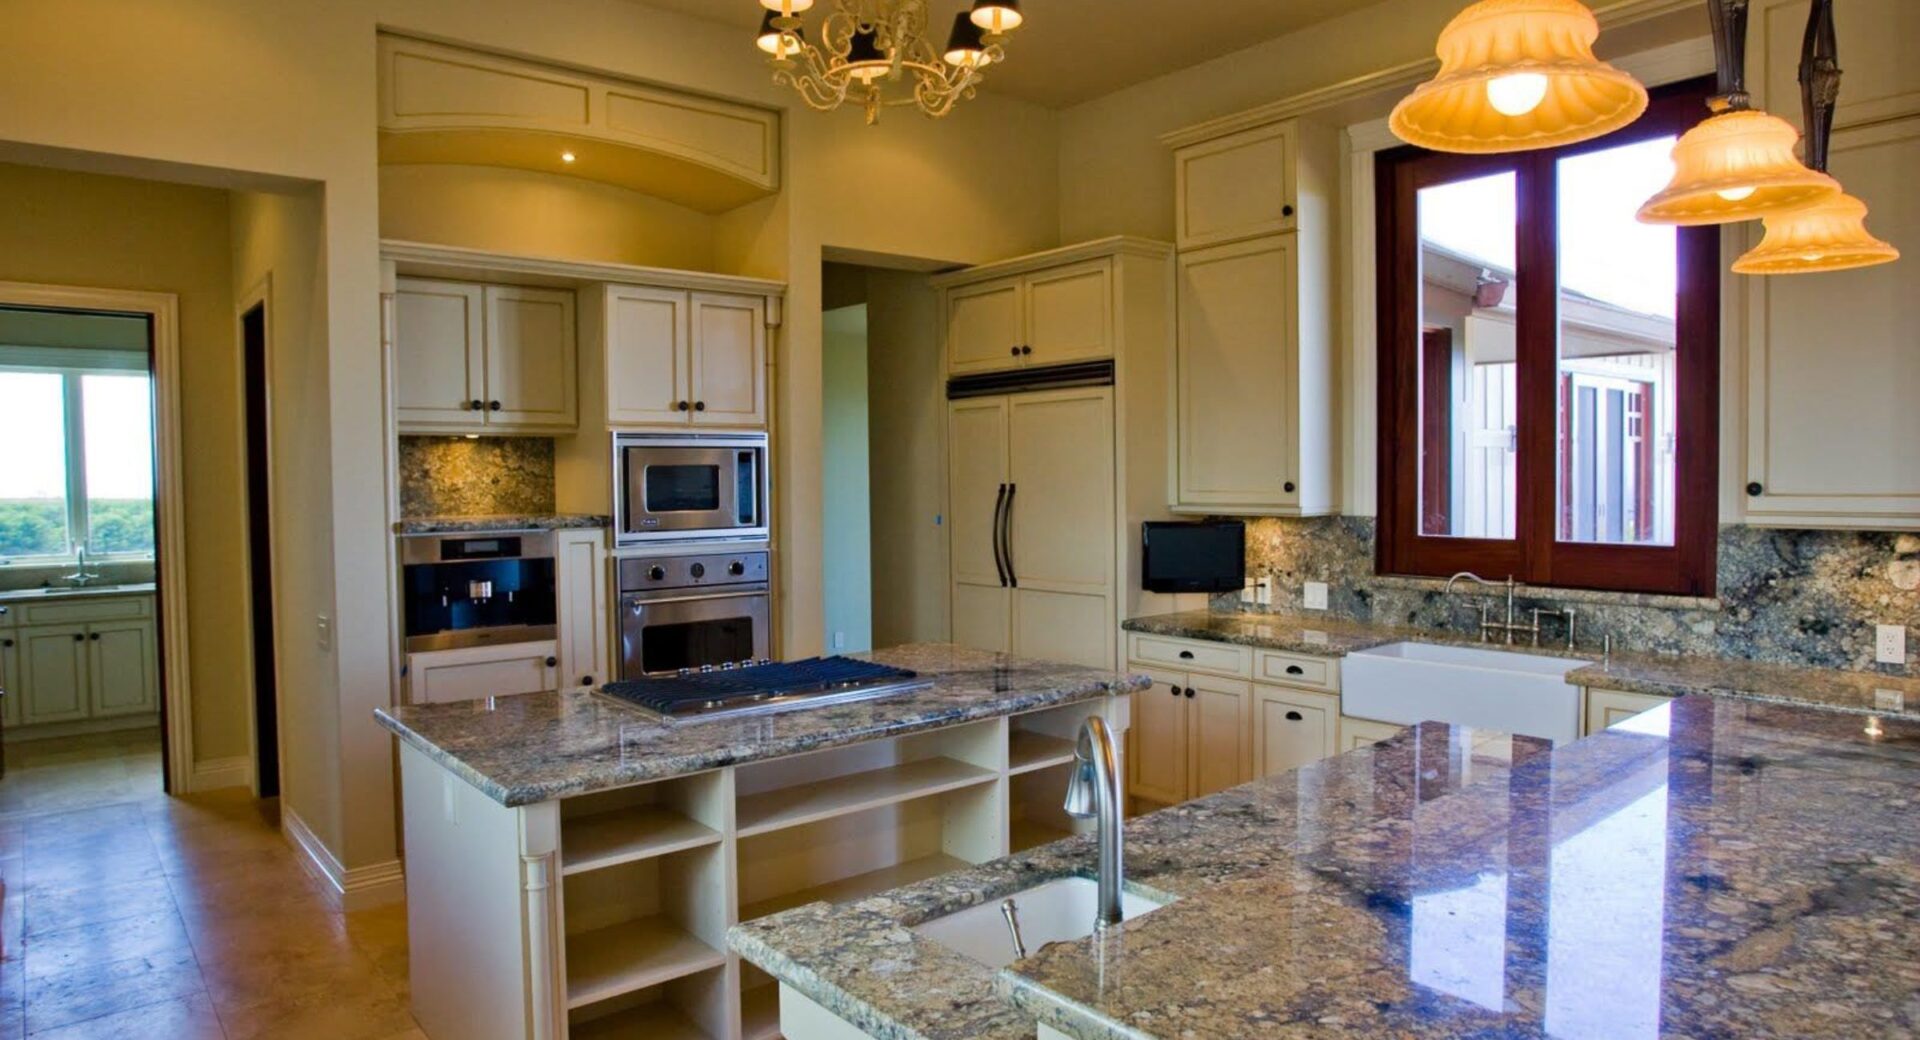 A spacious kitchen with modern appliances, granite countertops, and pendant lighting.